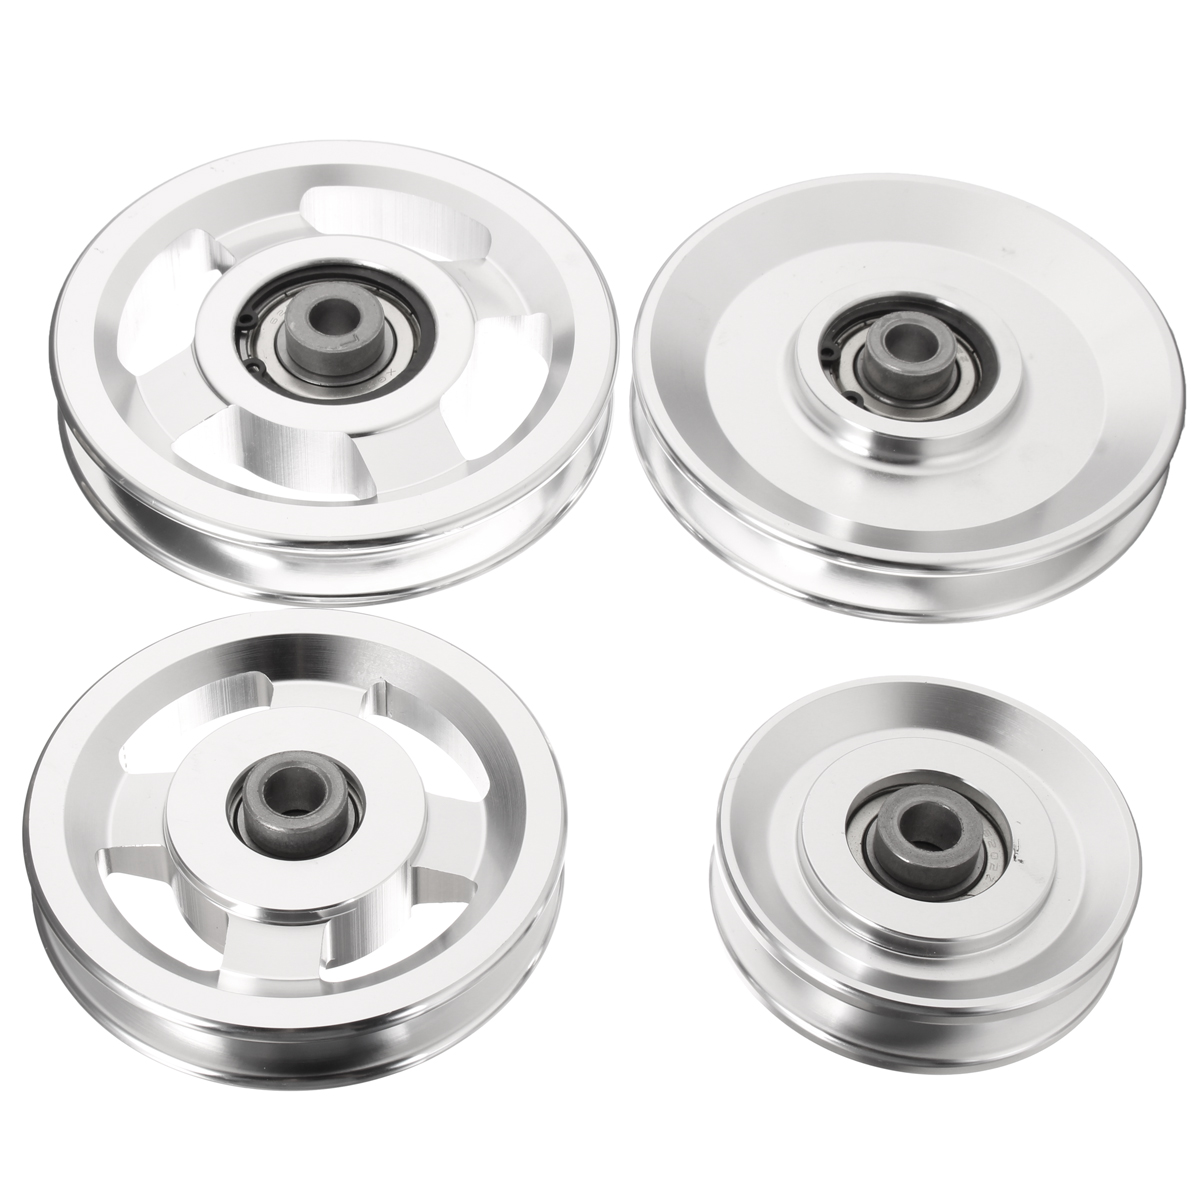 7395110114mm-Aluminum-Alloy-Bearing-Pulley-Wheels-Gym-Fitness-Equipment-Parts-Accessories-1637784-6